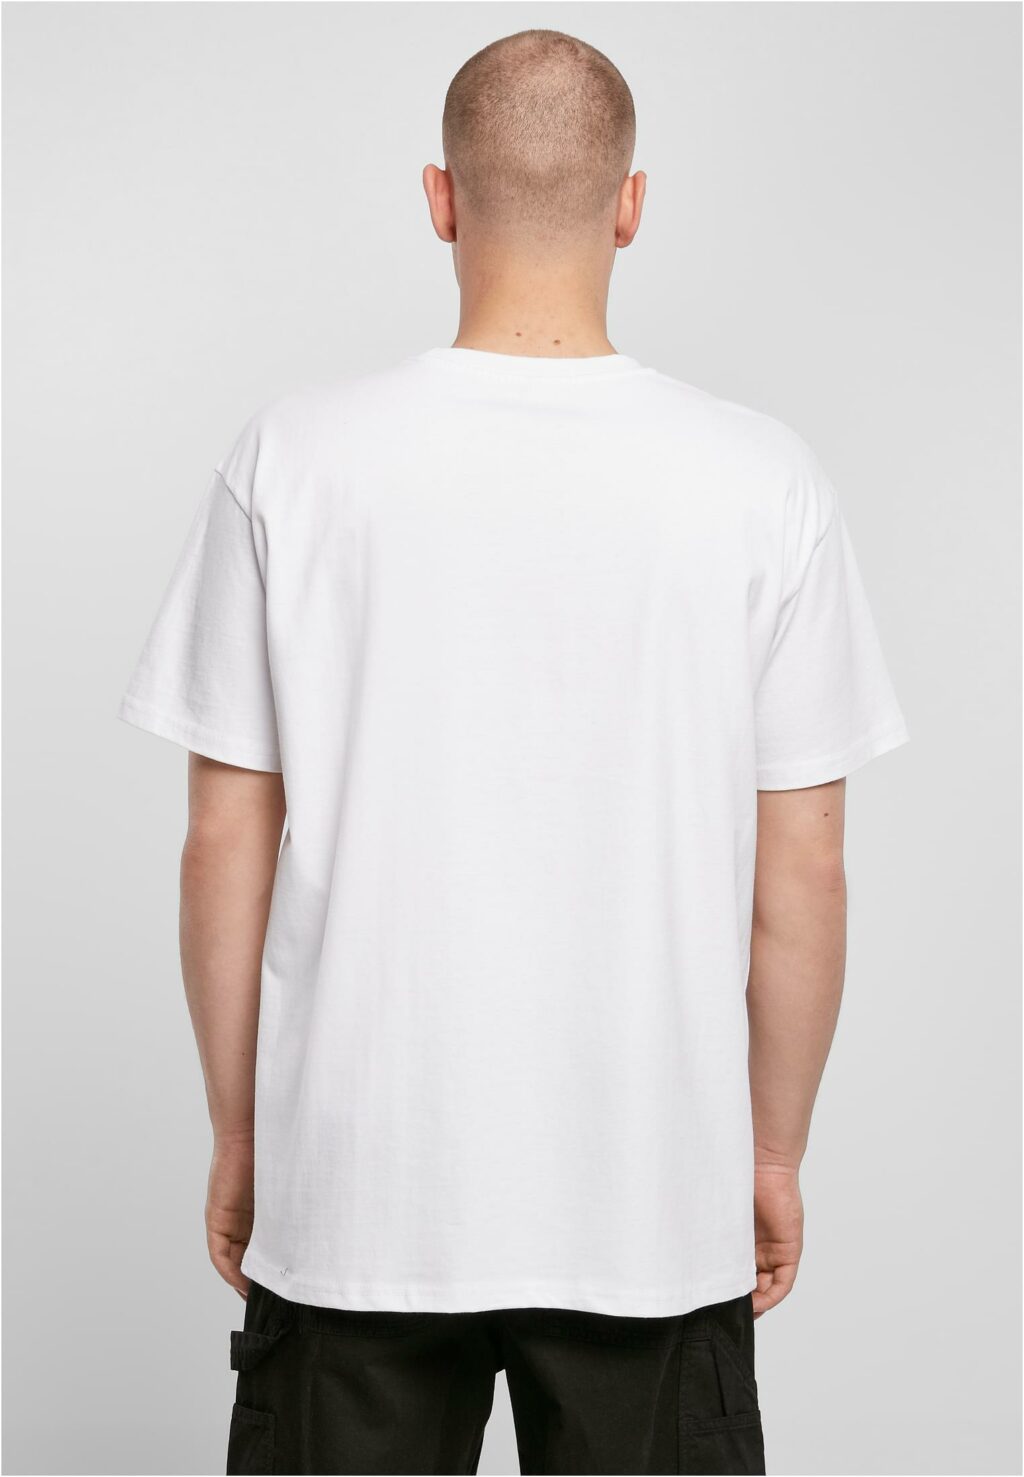 Basketball Clouds 2.0 Oversize Tee white MT1805